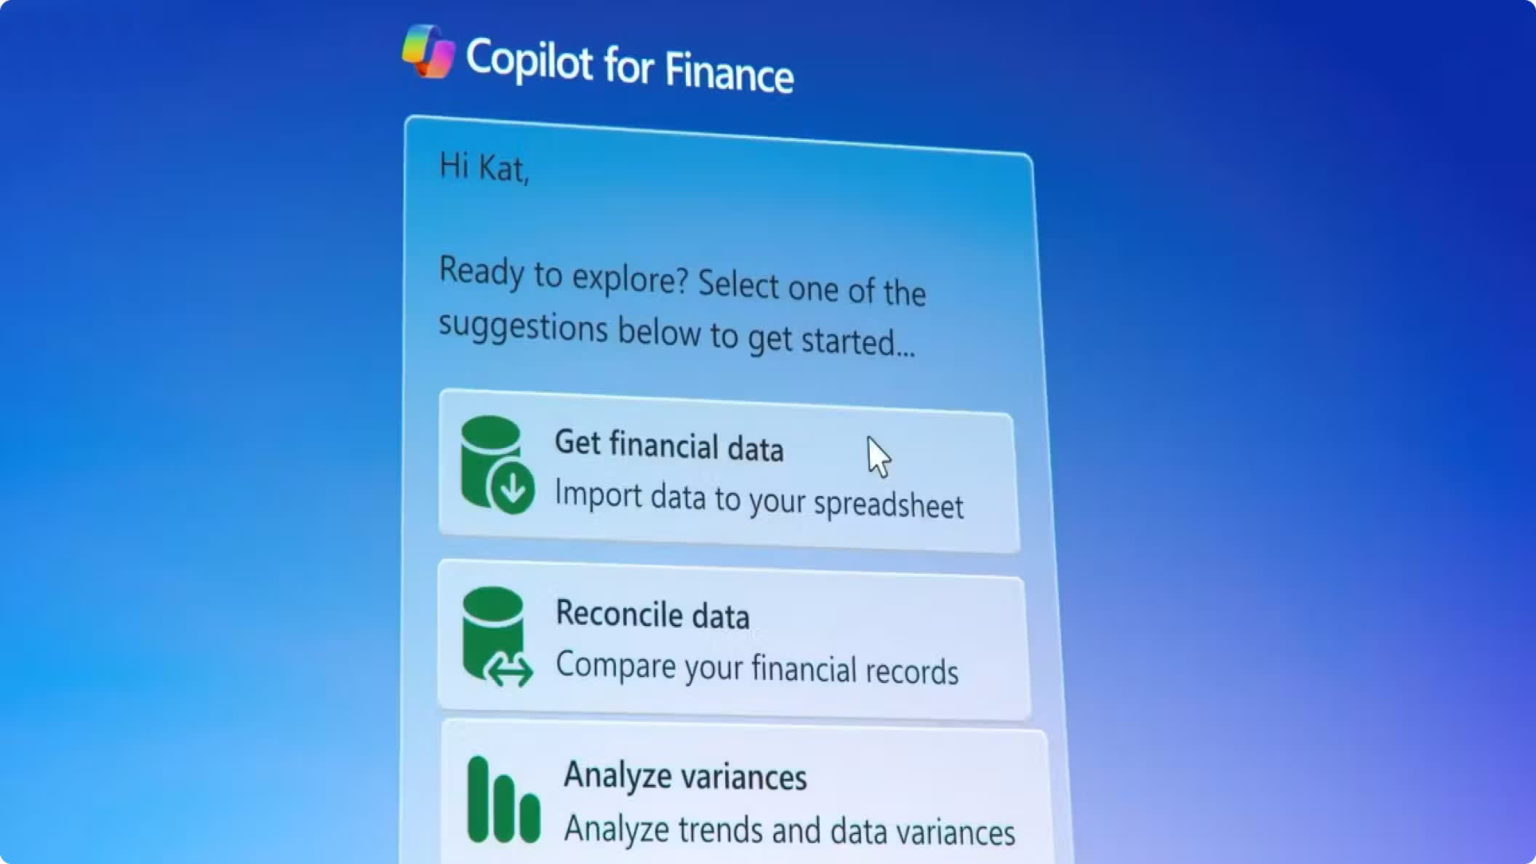 Microsoft wants to supercharge financial applications with Copilot for Finance